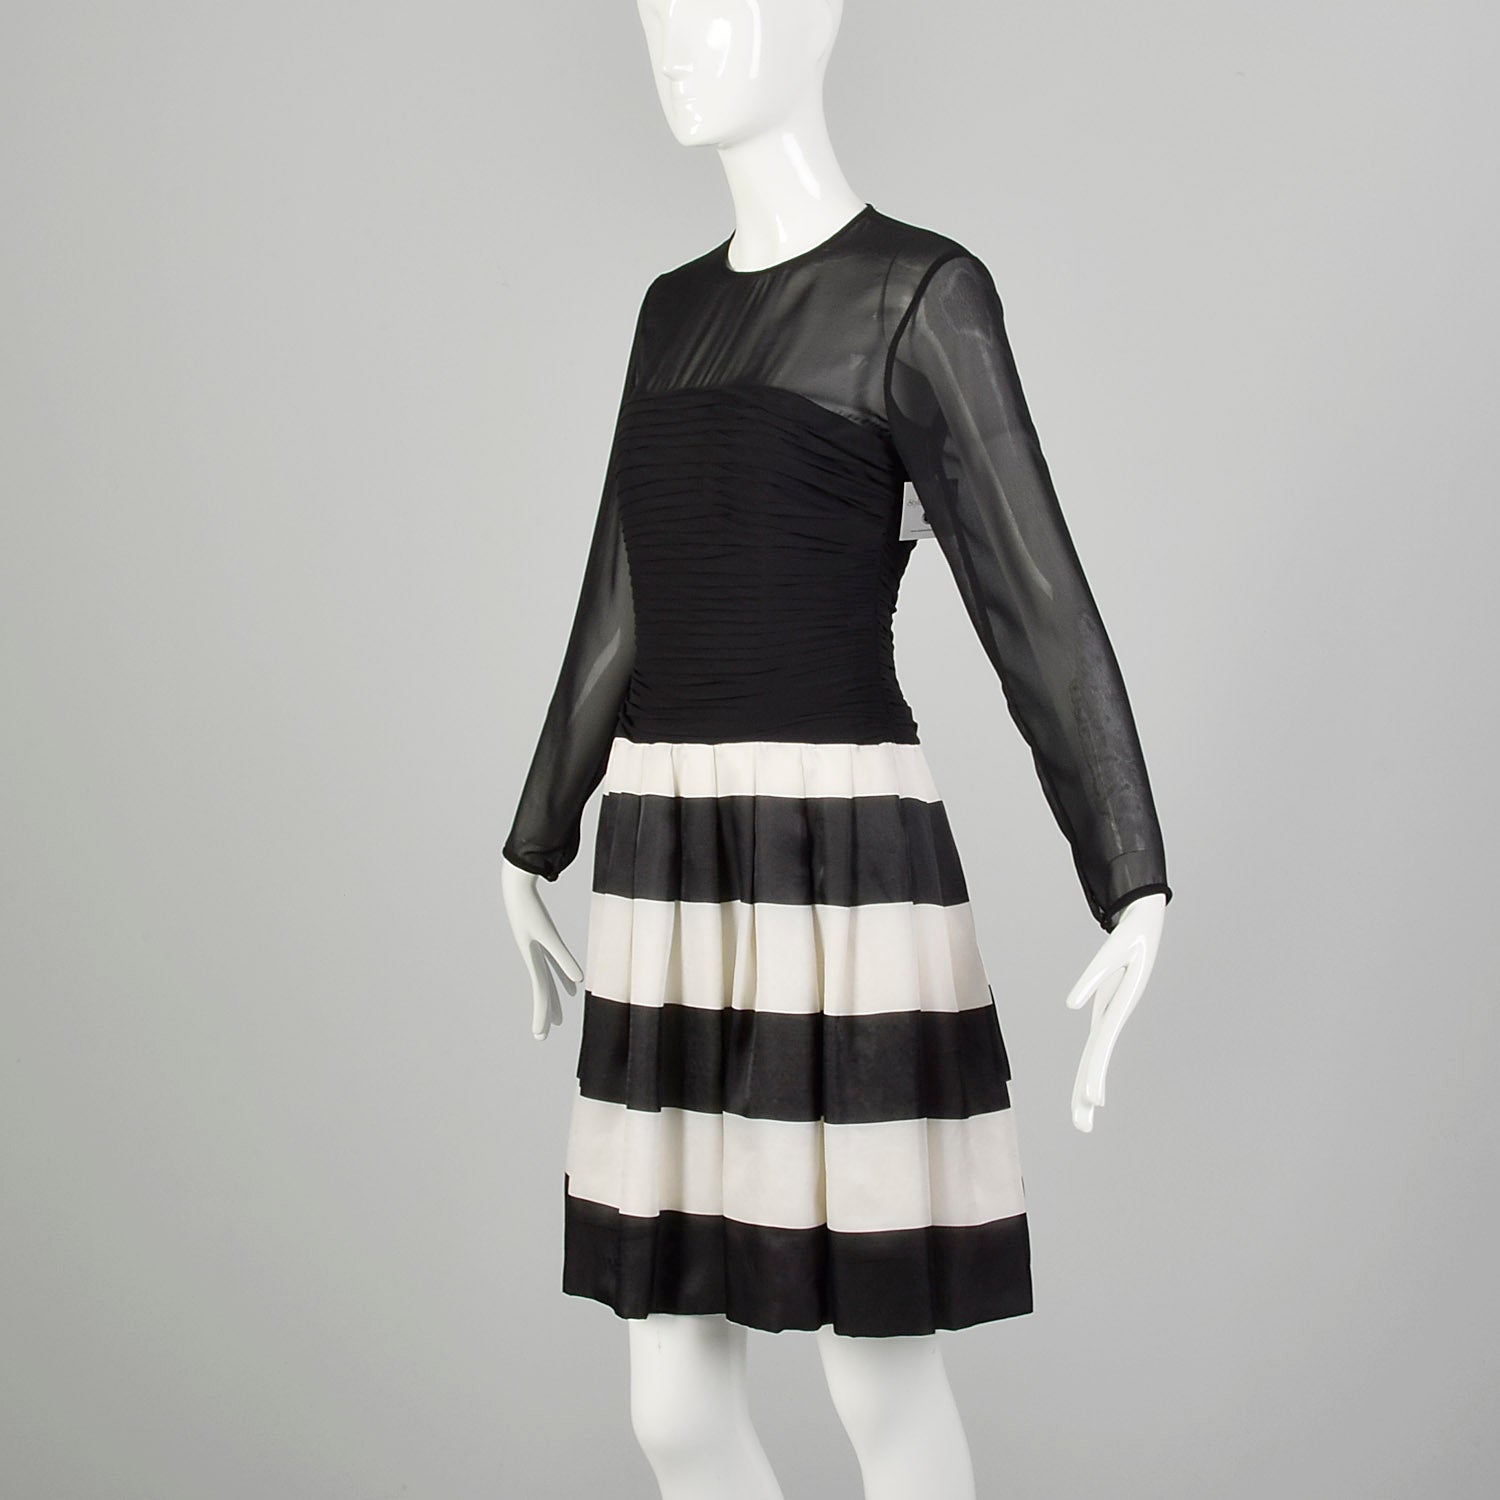 XS 2000s Dress Black Sheer White Stripe Long Sleeve Cocktail Party